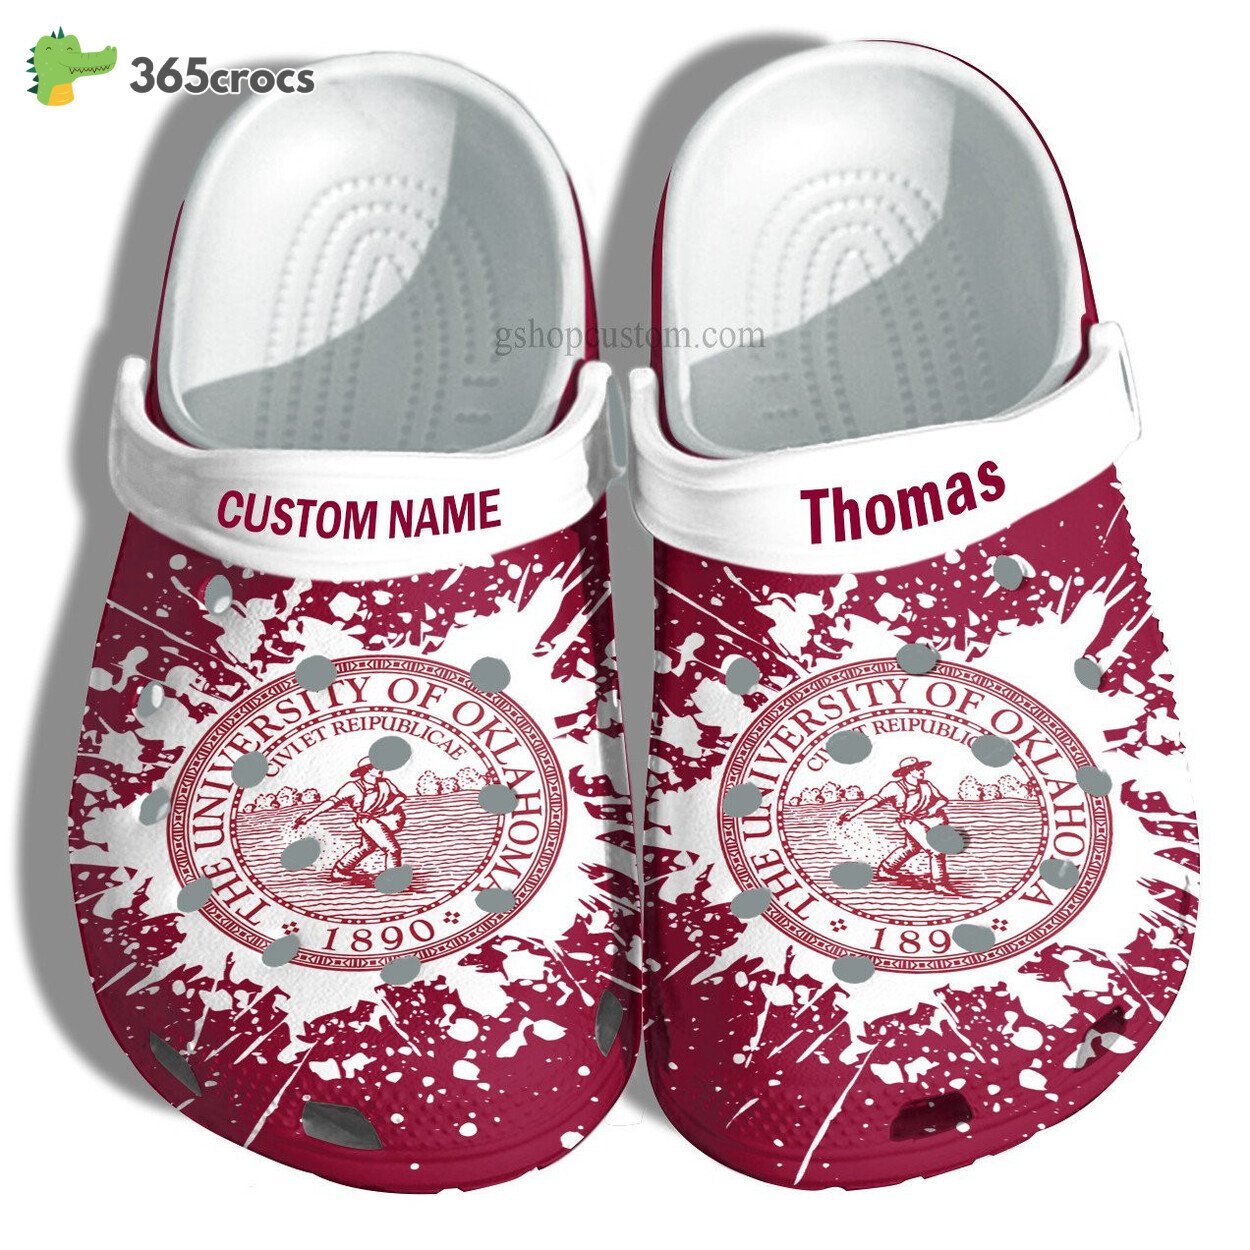 The University Of Oklahoma Graduation Gifts Croc Shoes Customize Admission Gift Shoes